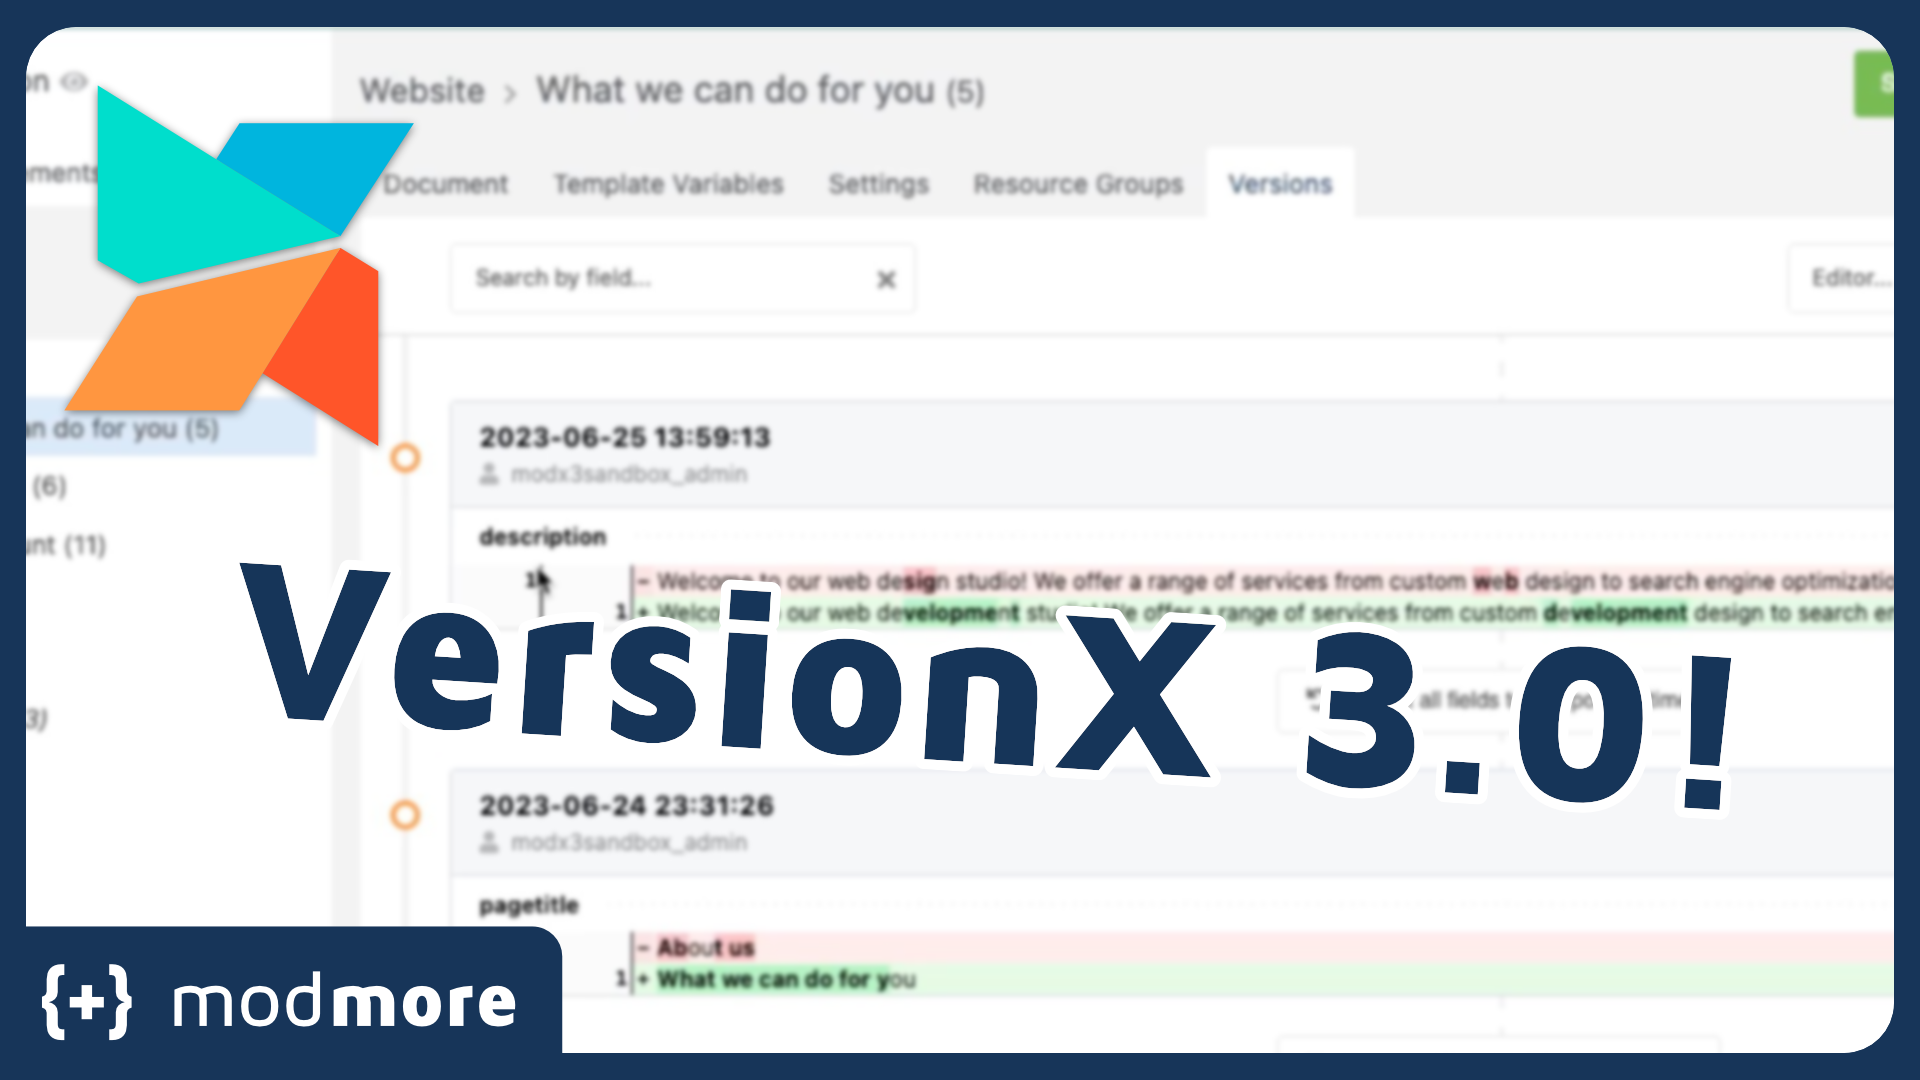 First look at VersionX 3.0!